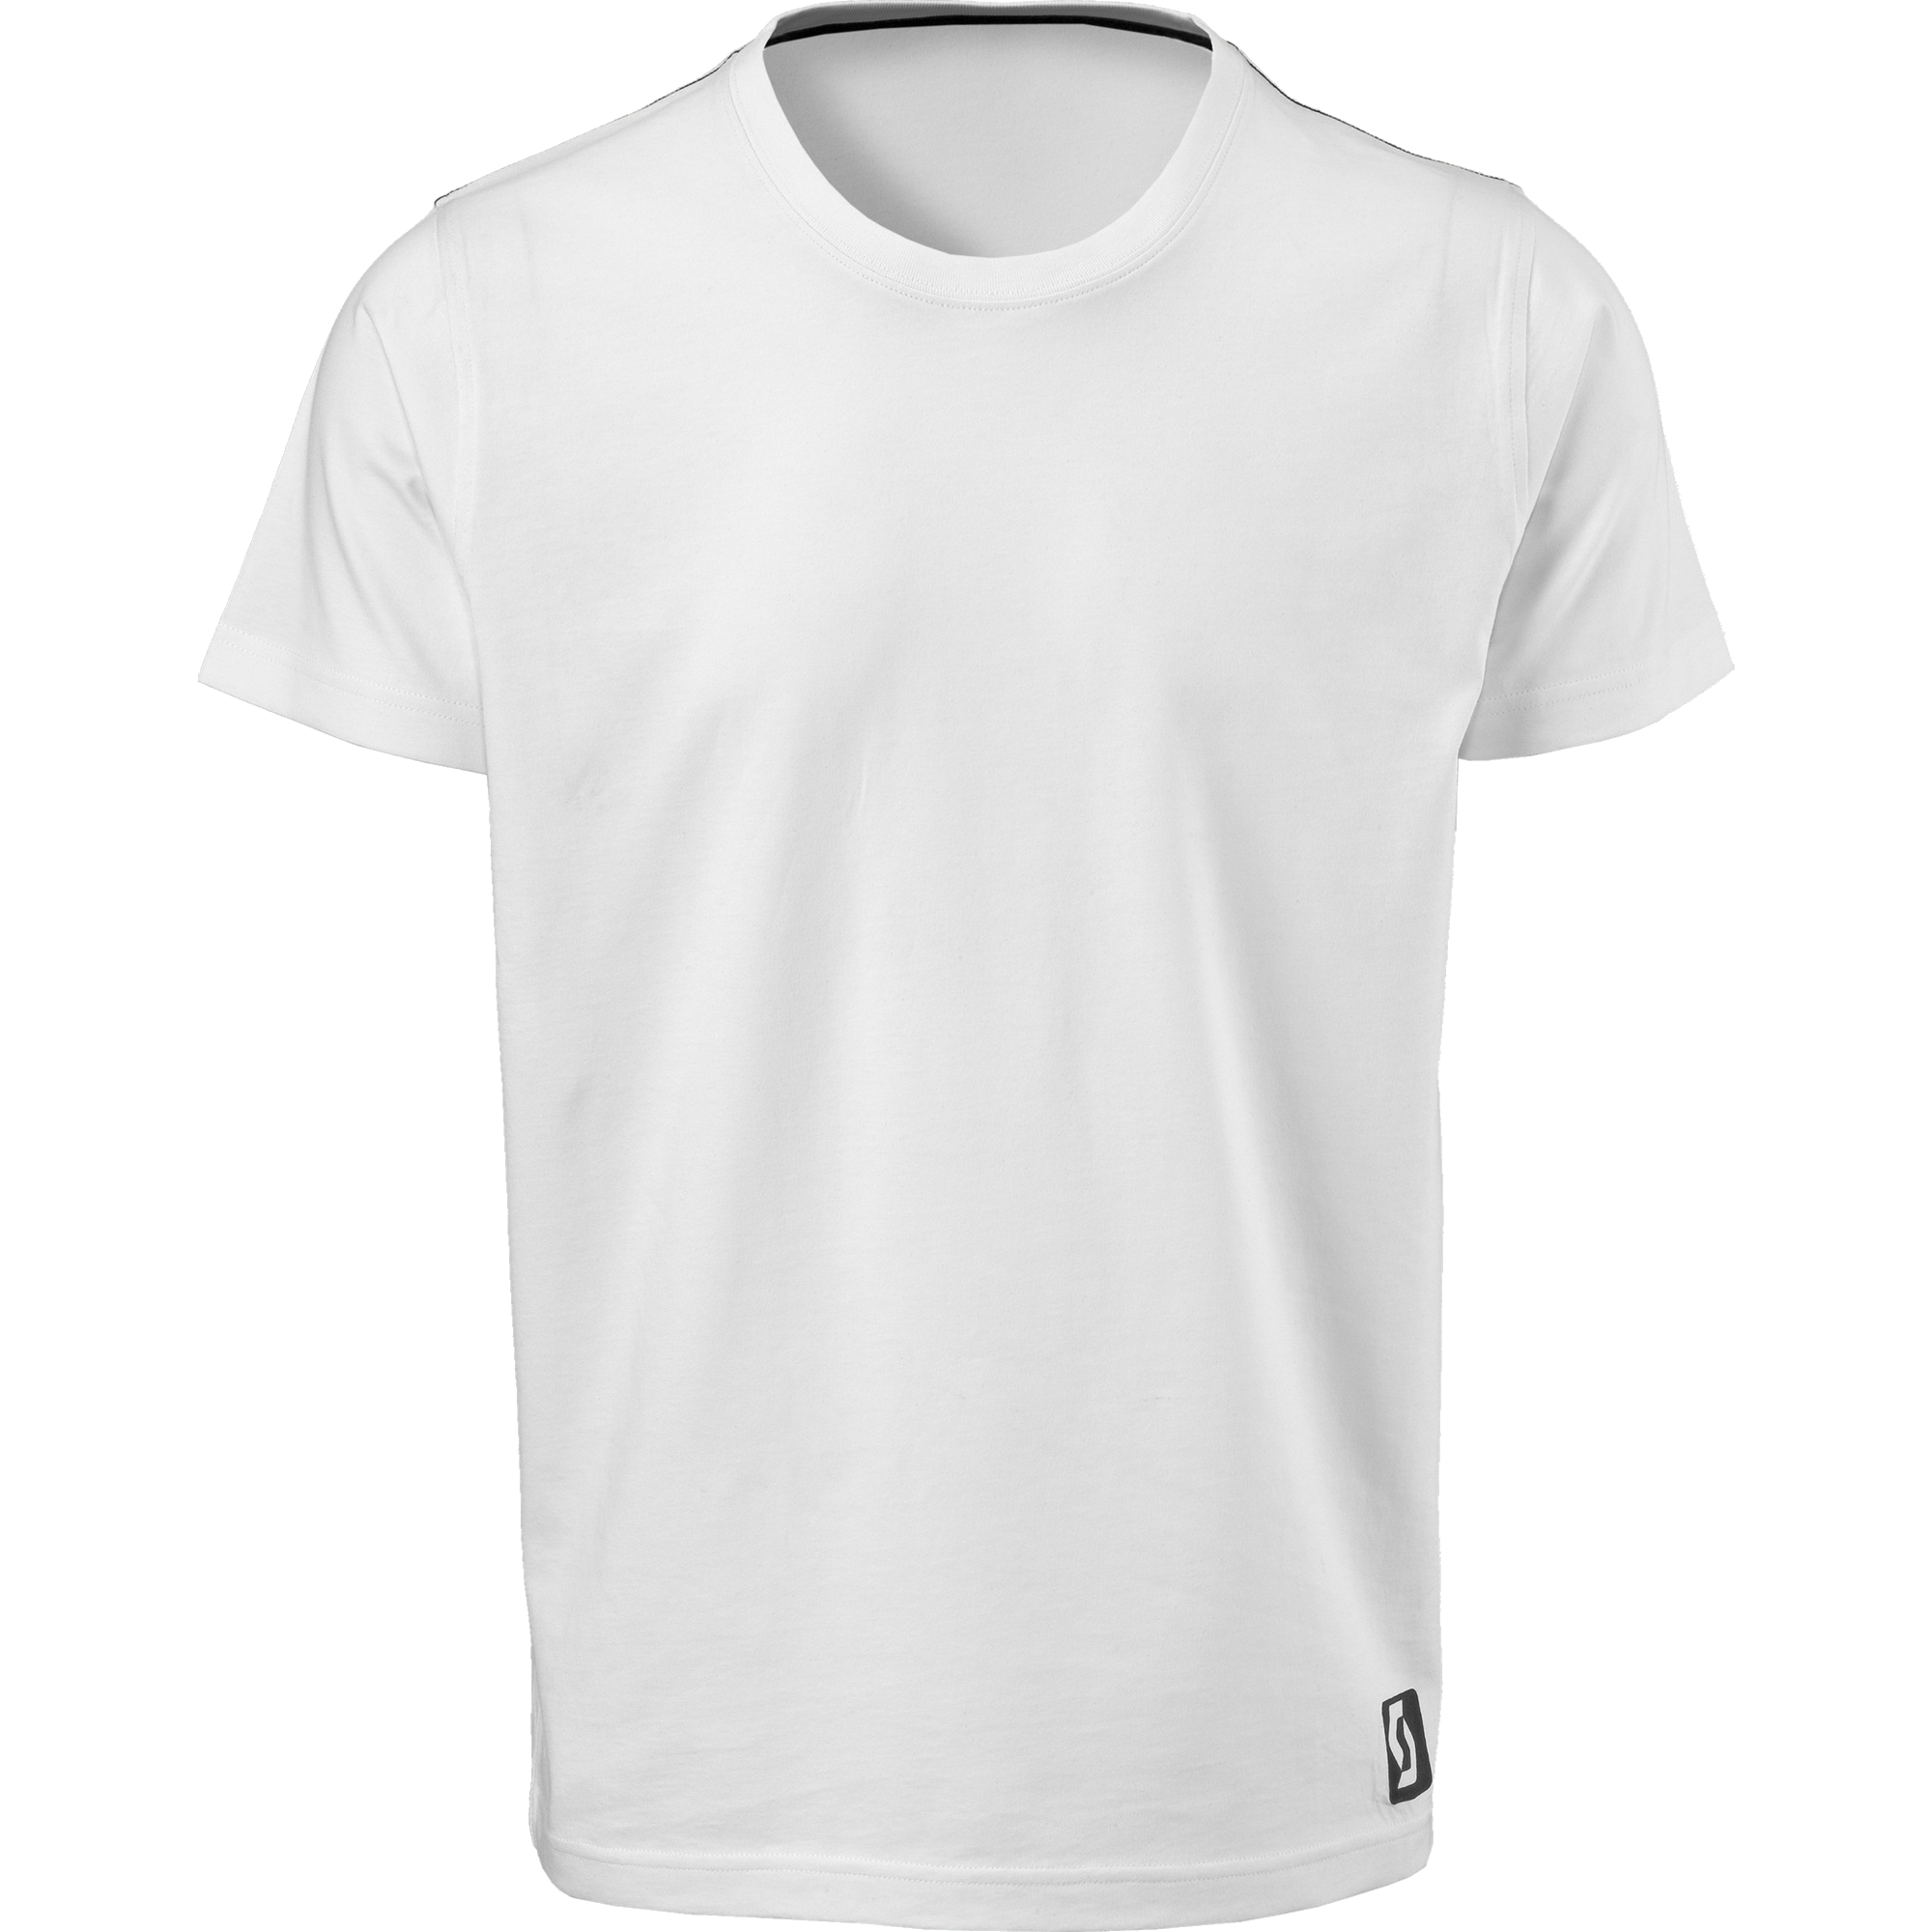 White T-shirt PNG image transparent image download, size: 2000x2000px